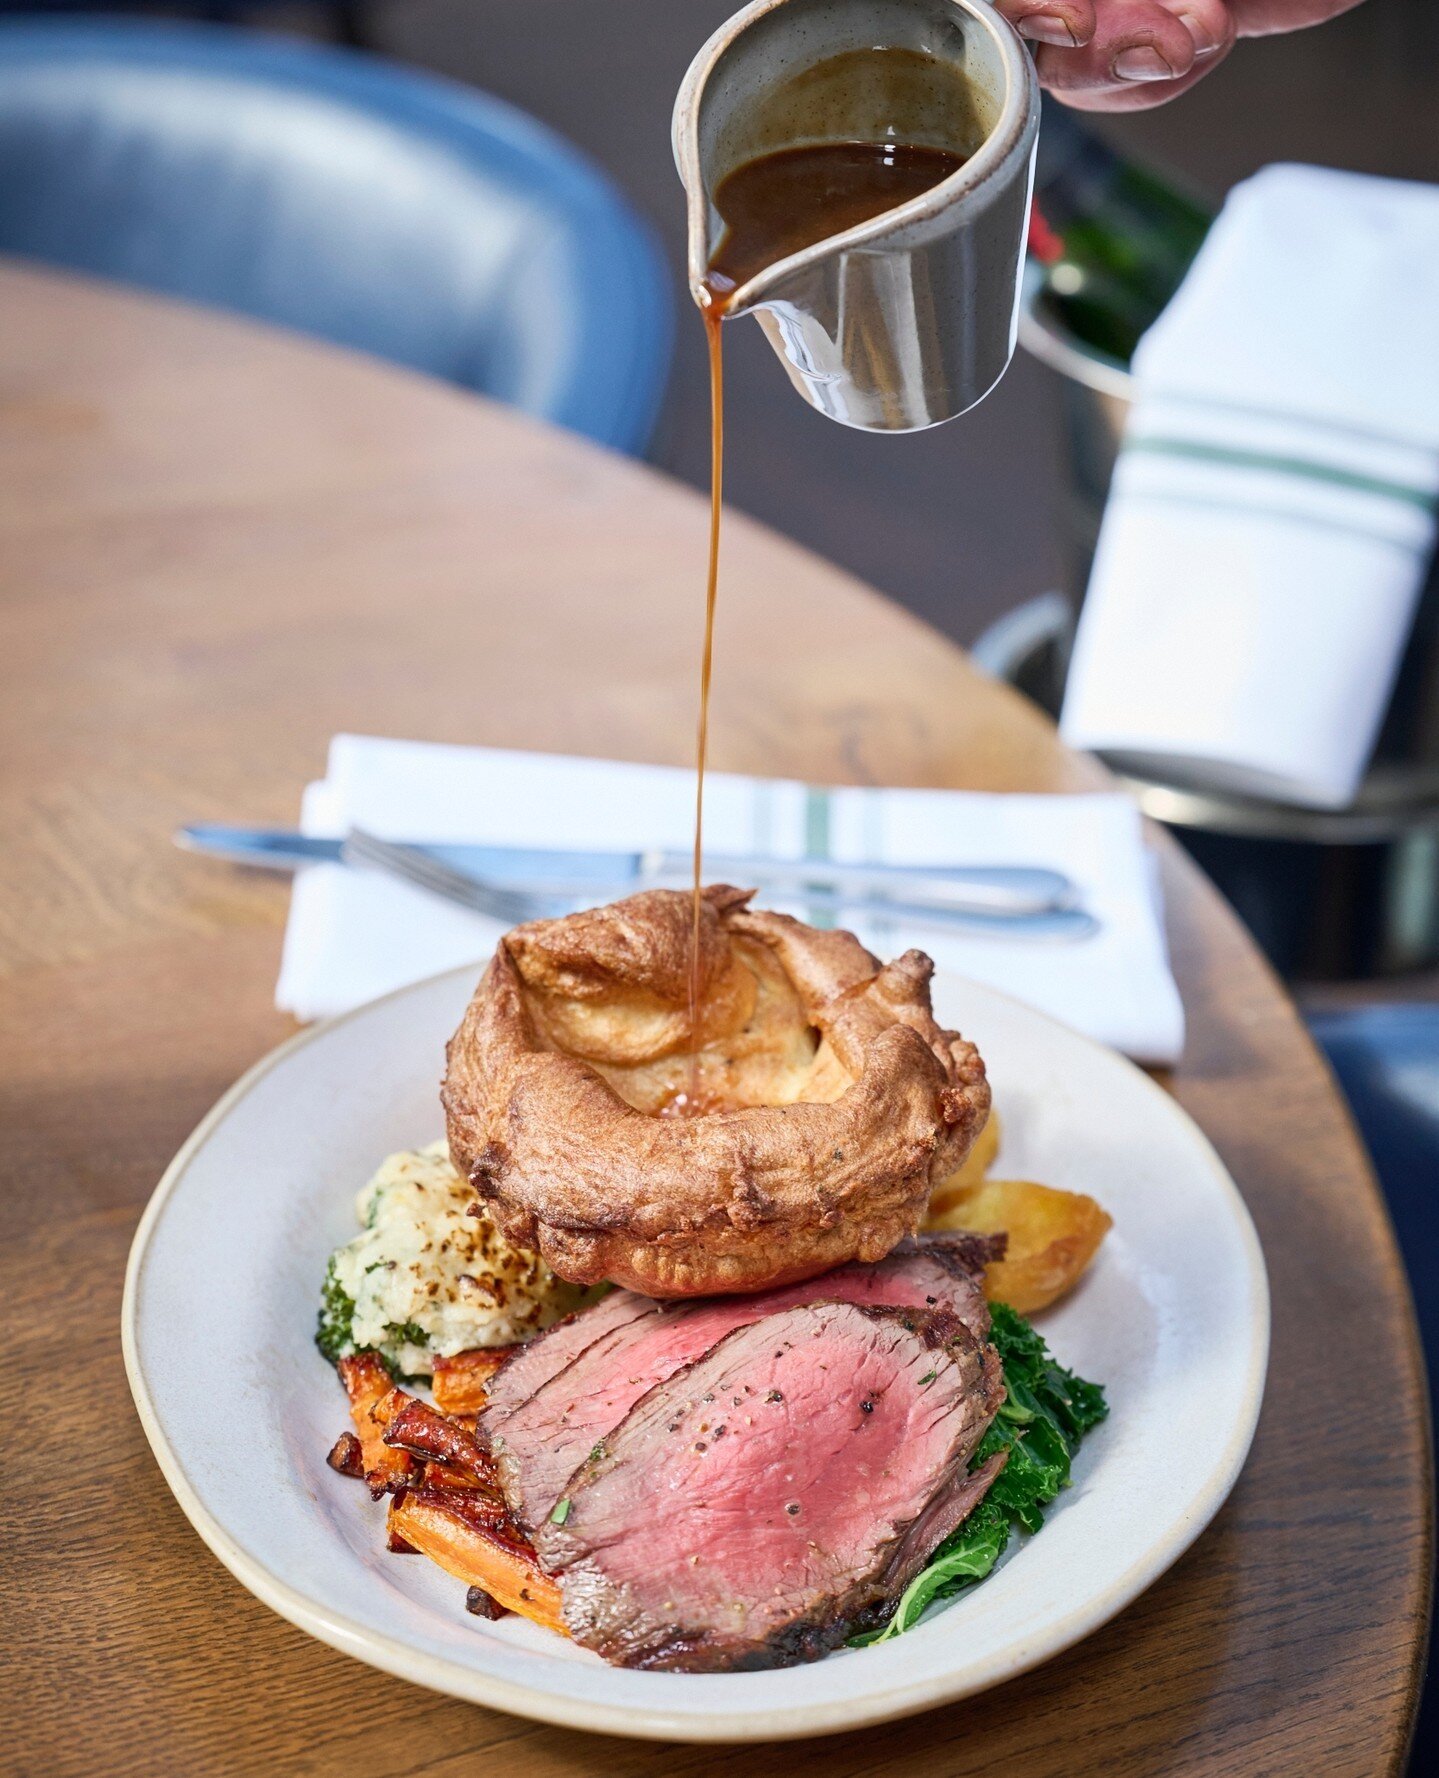 Sunday Plans...? Book a table @hartstreetavern and enjoy our 30 day aged Hereford Beef or our slow roasted Kings estate Lamb shoulder for two. A succulent addition to our menu every Sunday lunch! ⁠
#weekend #meat #meatlover #sundayfunday #weekendmood